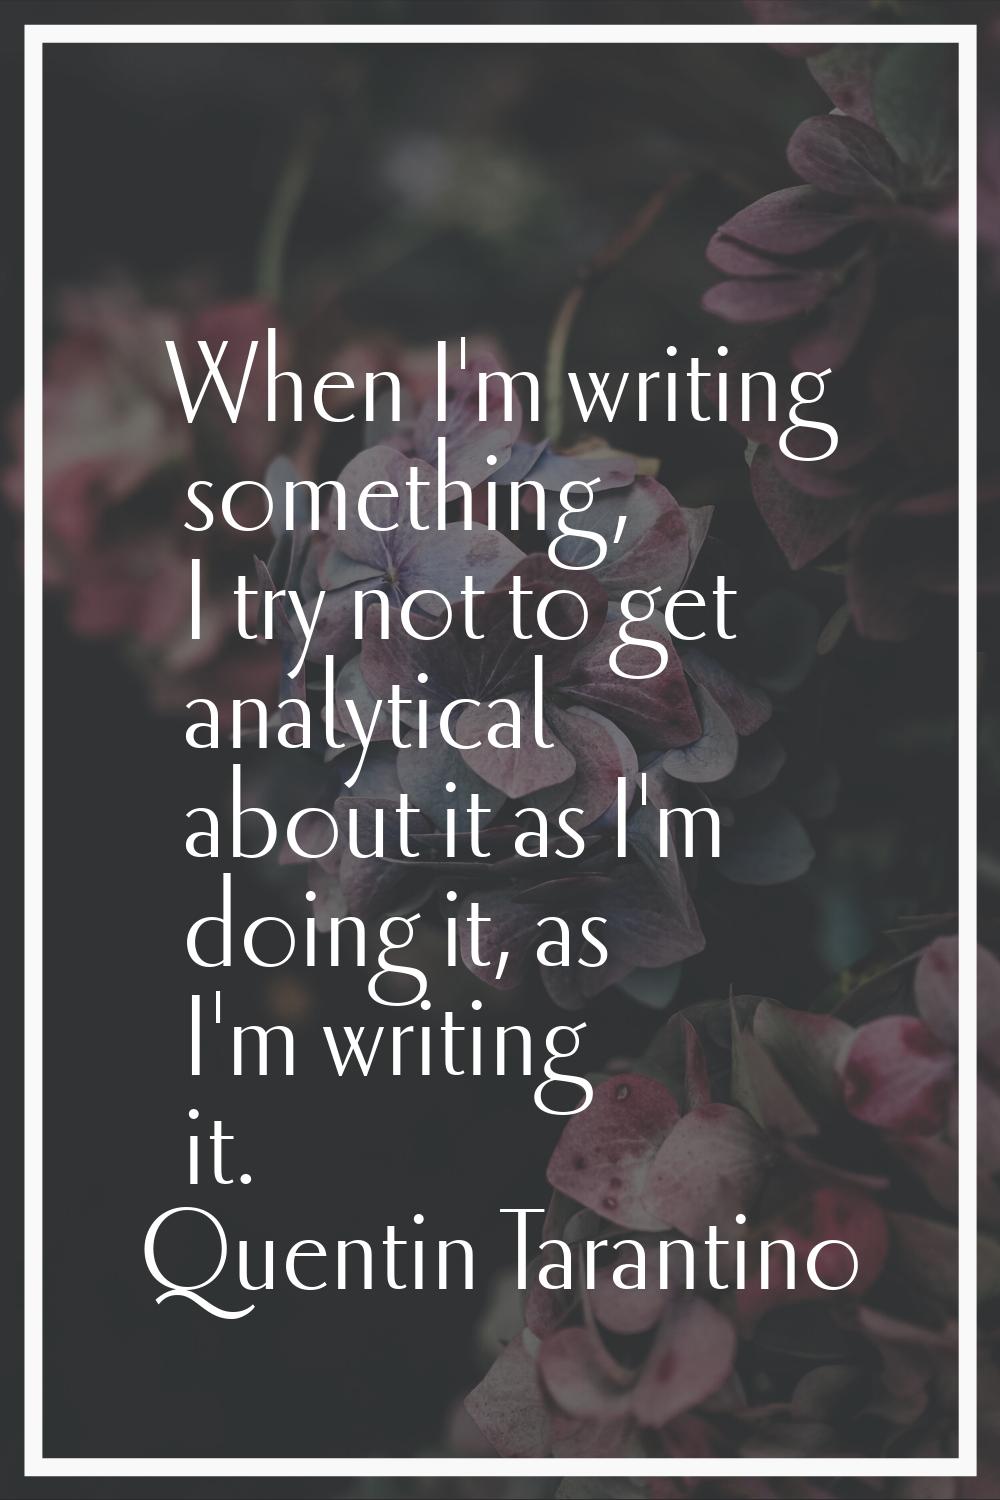 When I'm writing something, I try not to get analytical about it as I'm doing it, as I'm writing it